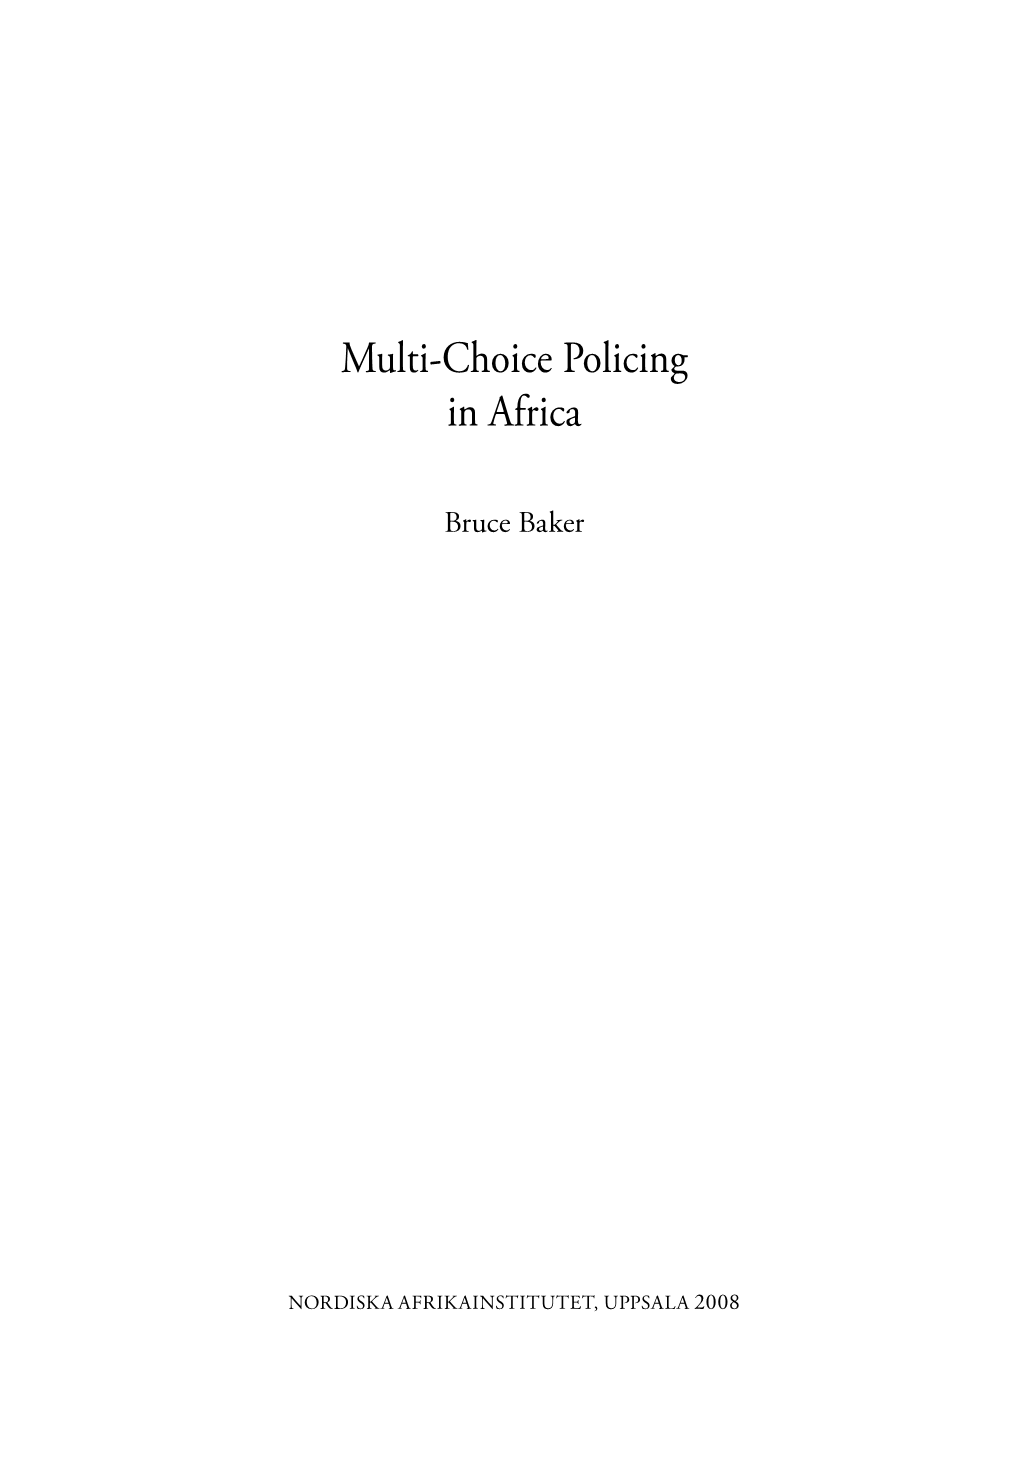 Multi-Choice Policing in Africa